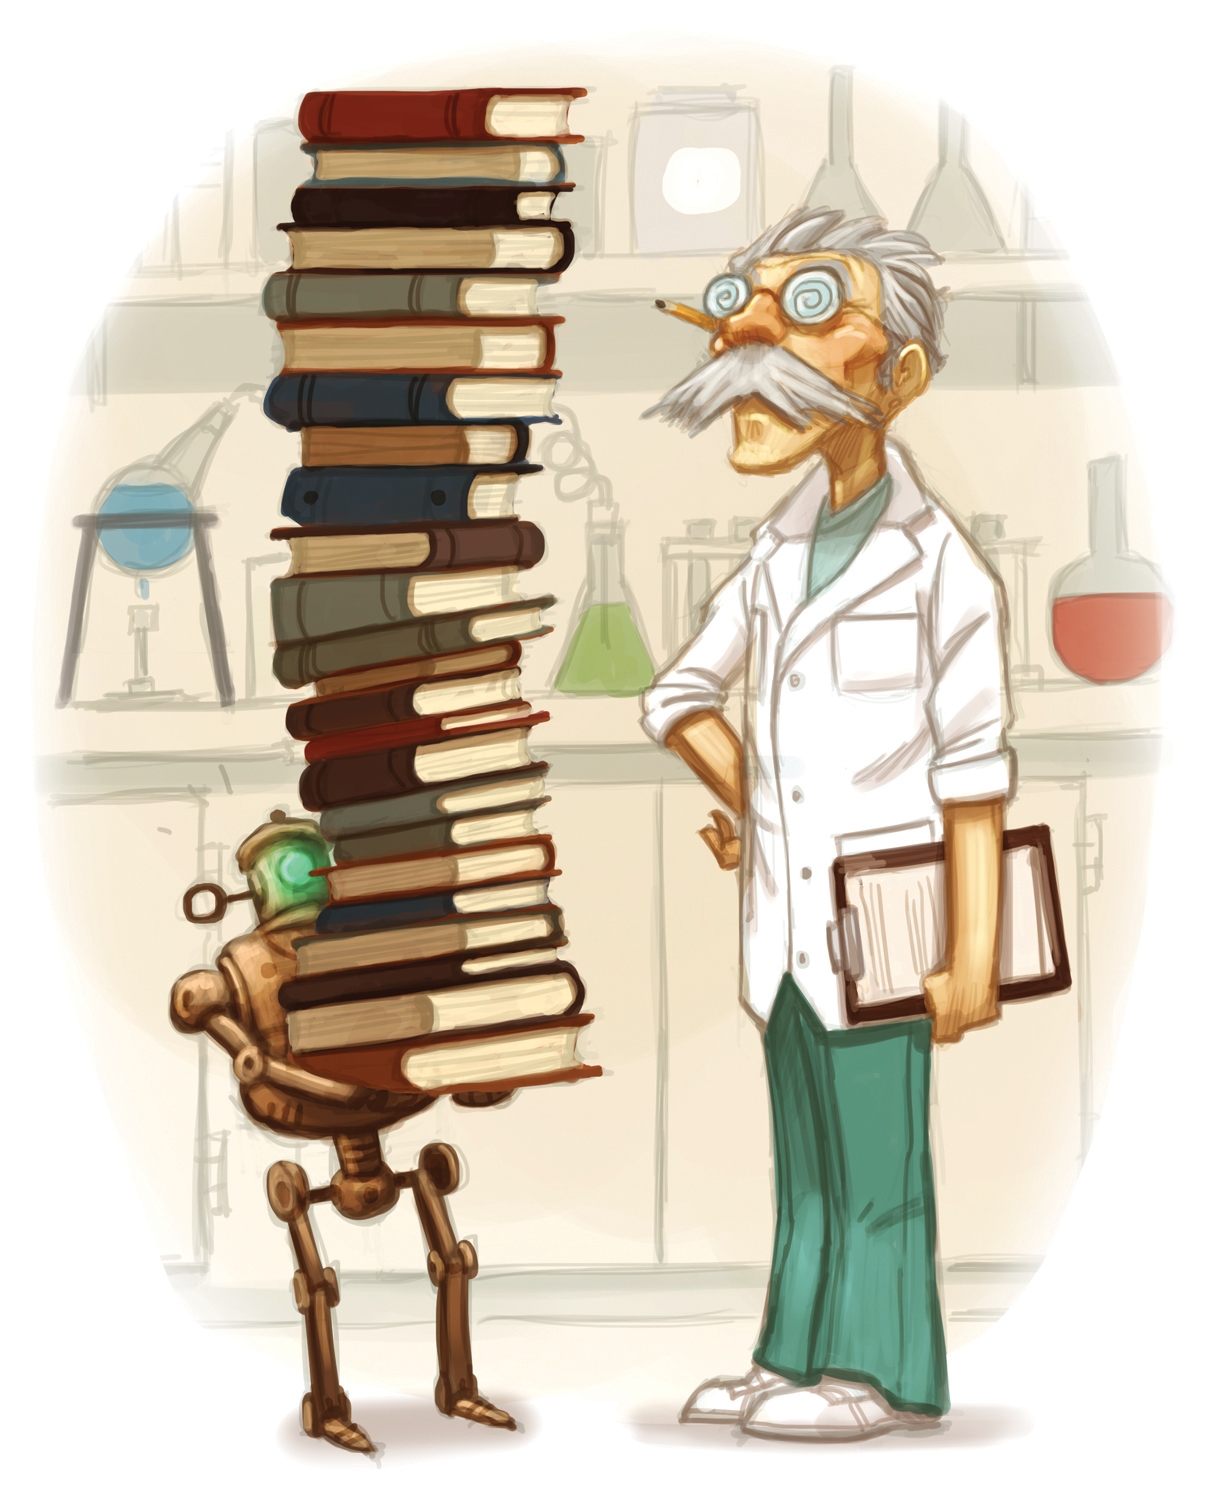 Scienctist with books